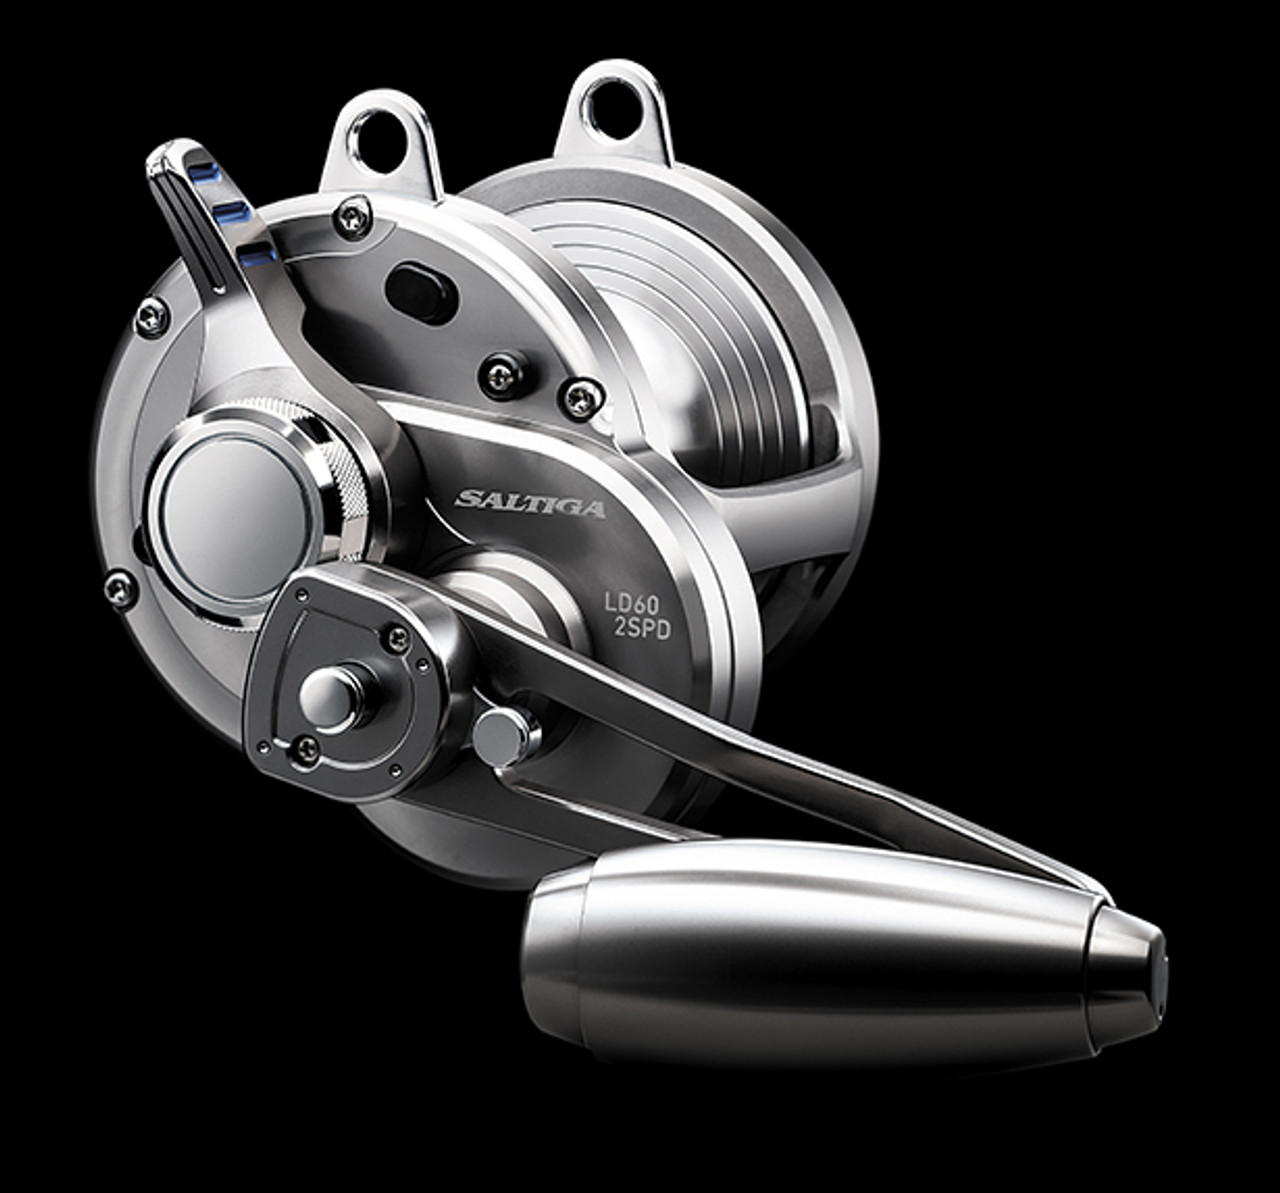 Daiwa Saltiga LD20HS Lever Drag Conventional Reel - La Paz County Sheriff's  Office Dedicated to Service